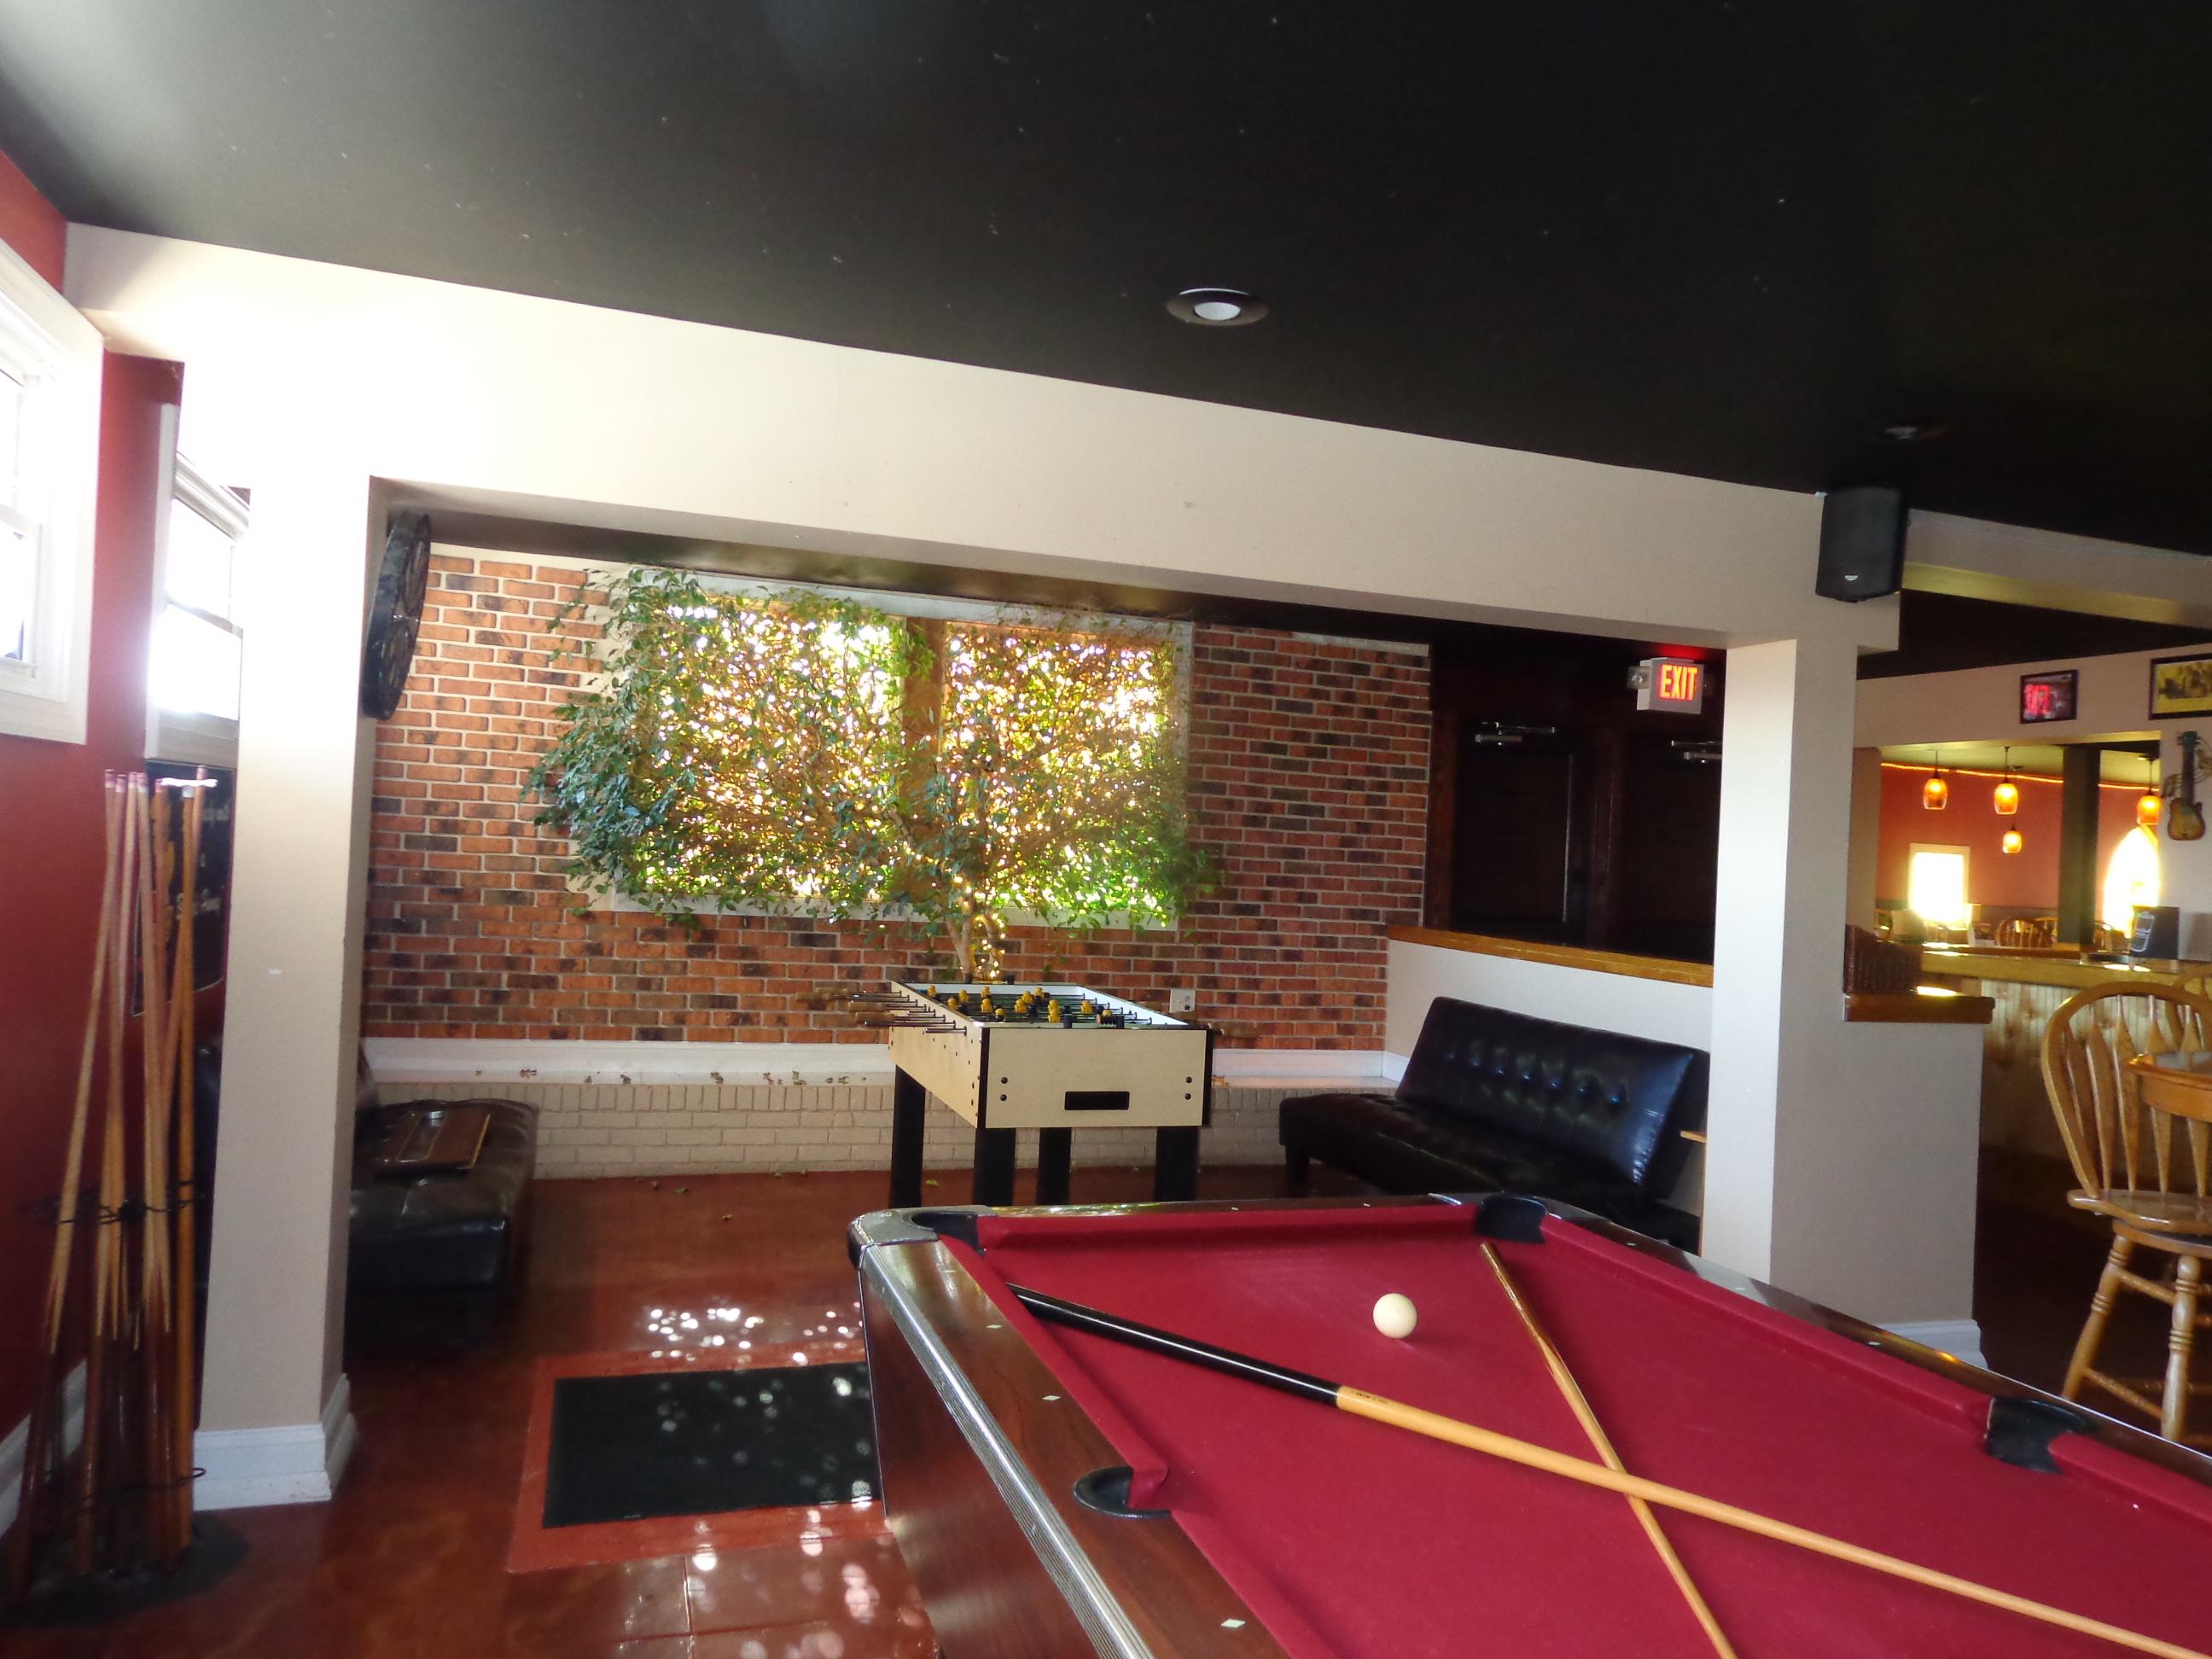 Fully furnished restaurant - would work great for a restaurant & brewery combination.